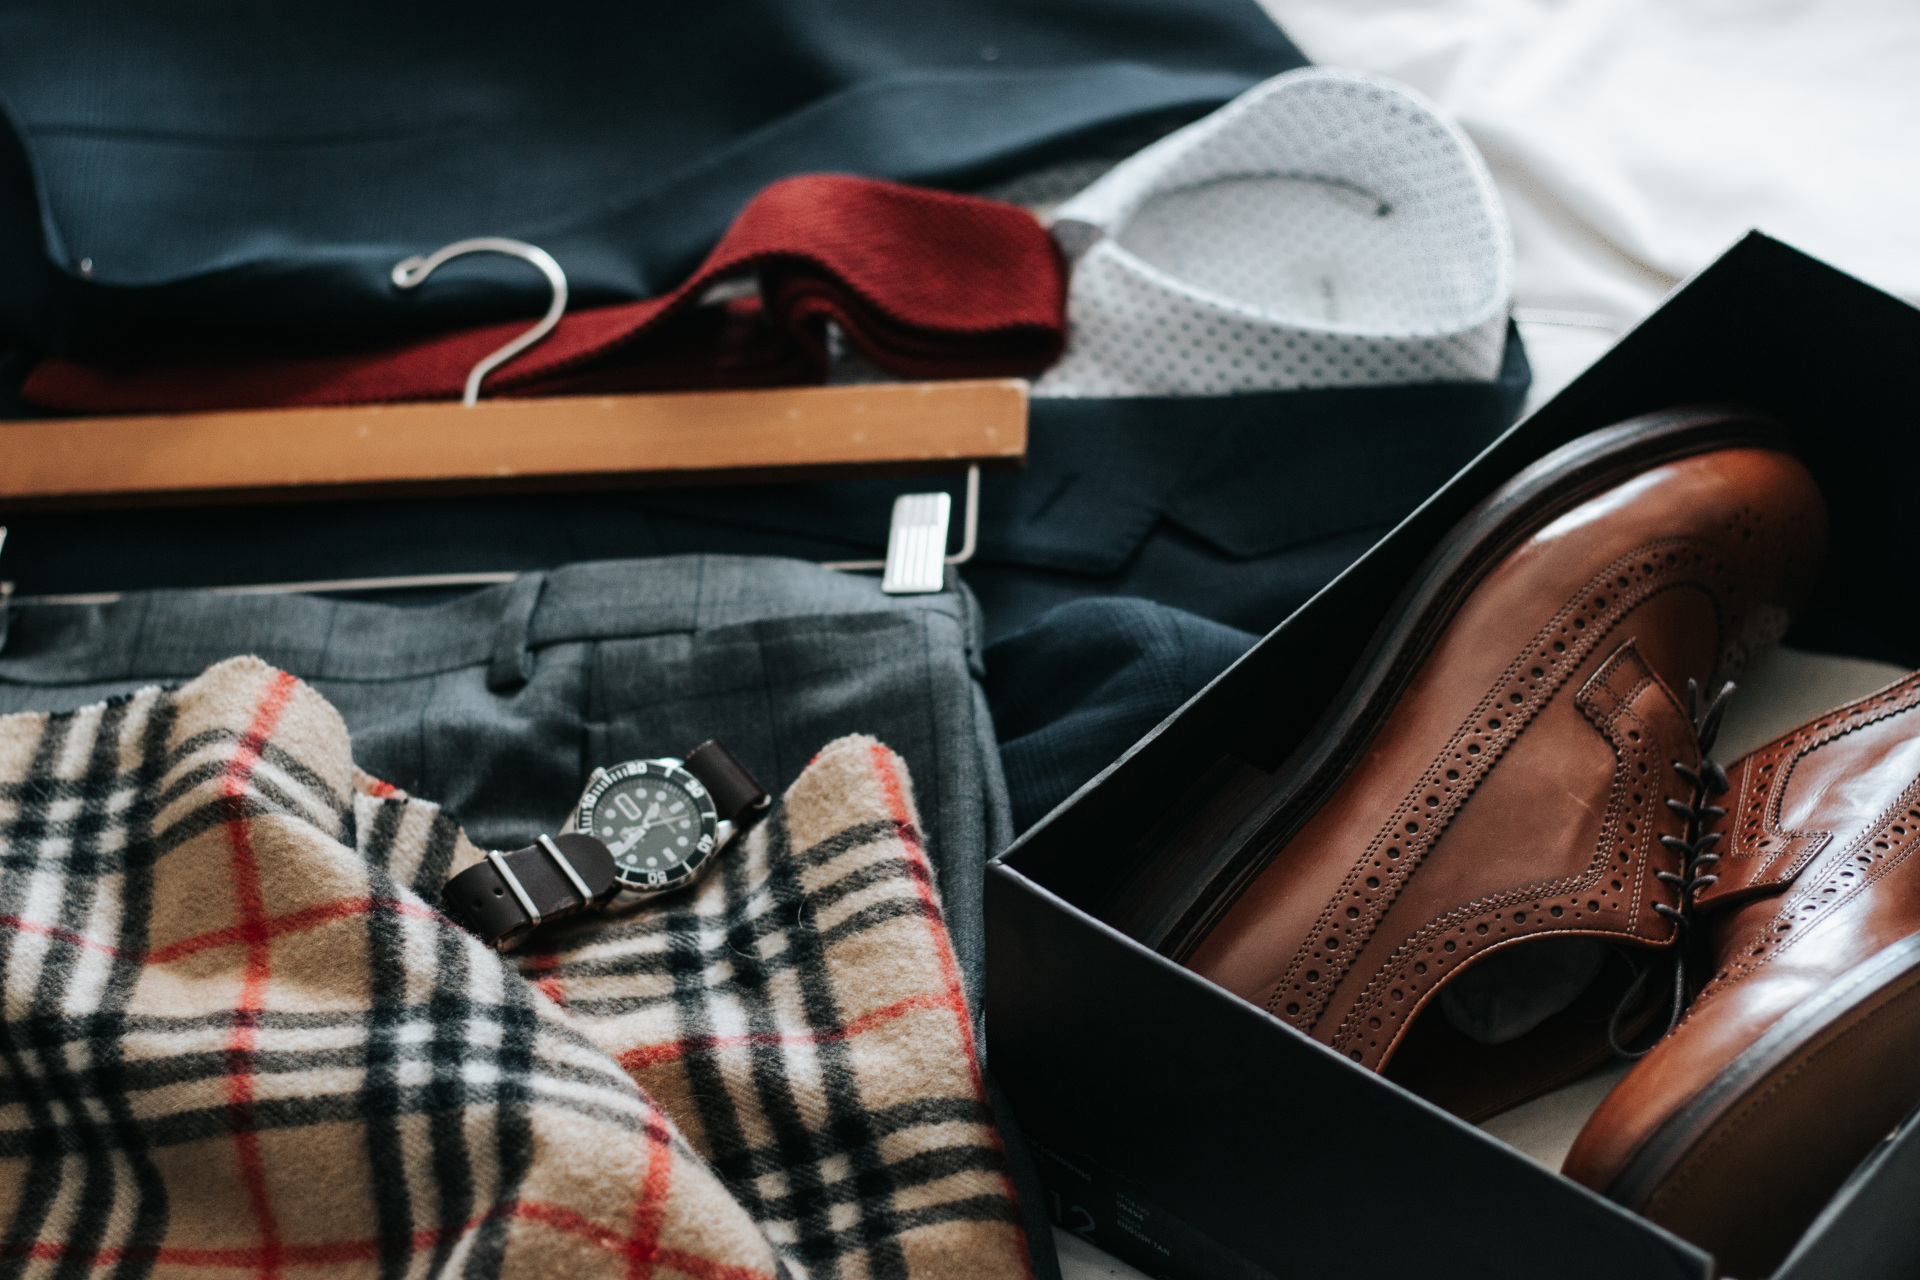 Men's formal clothes laid out on bed